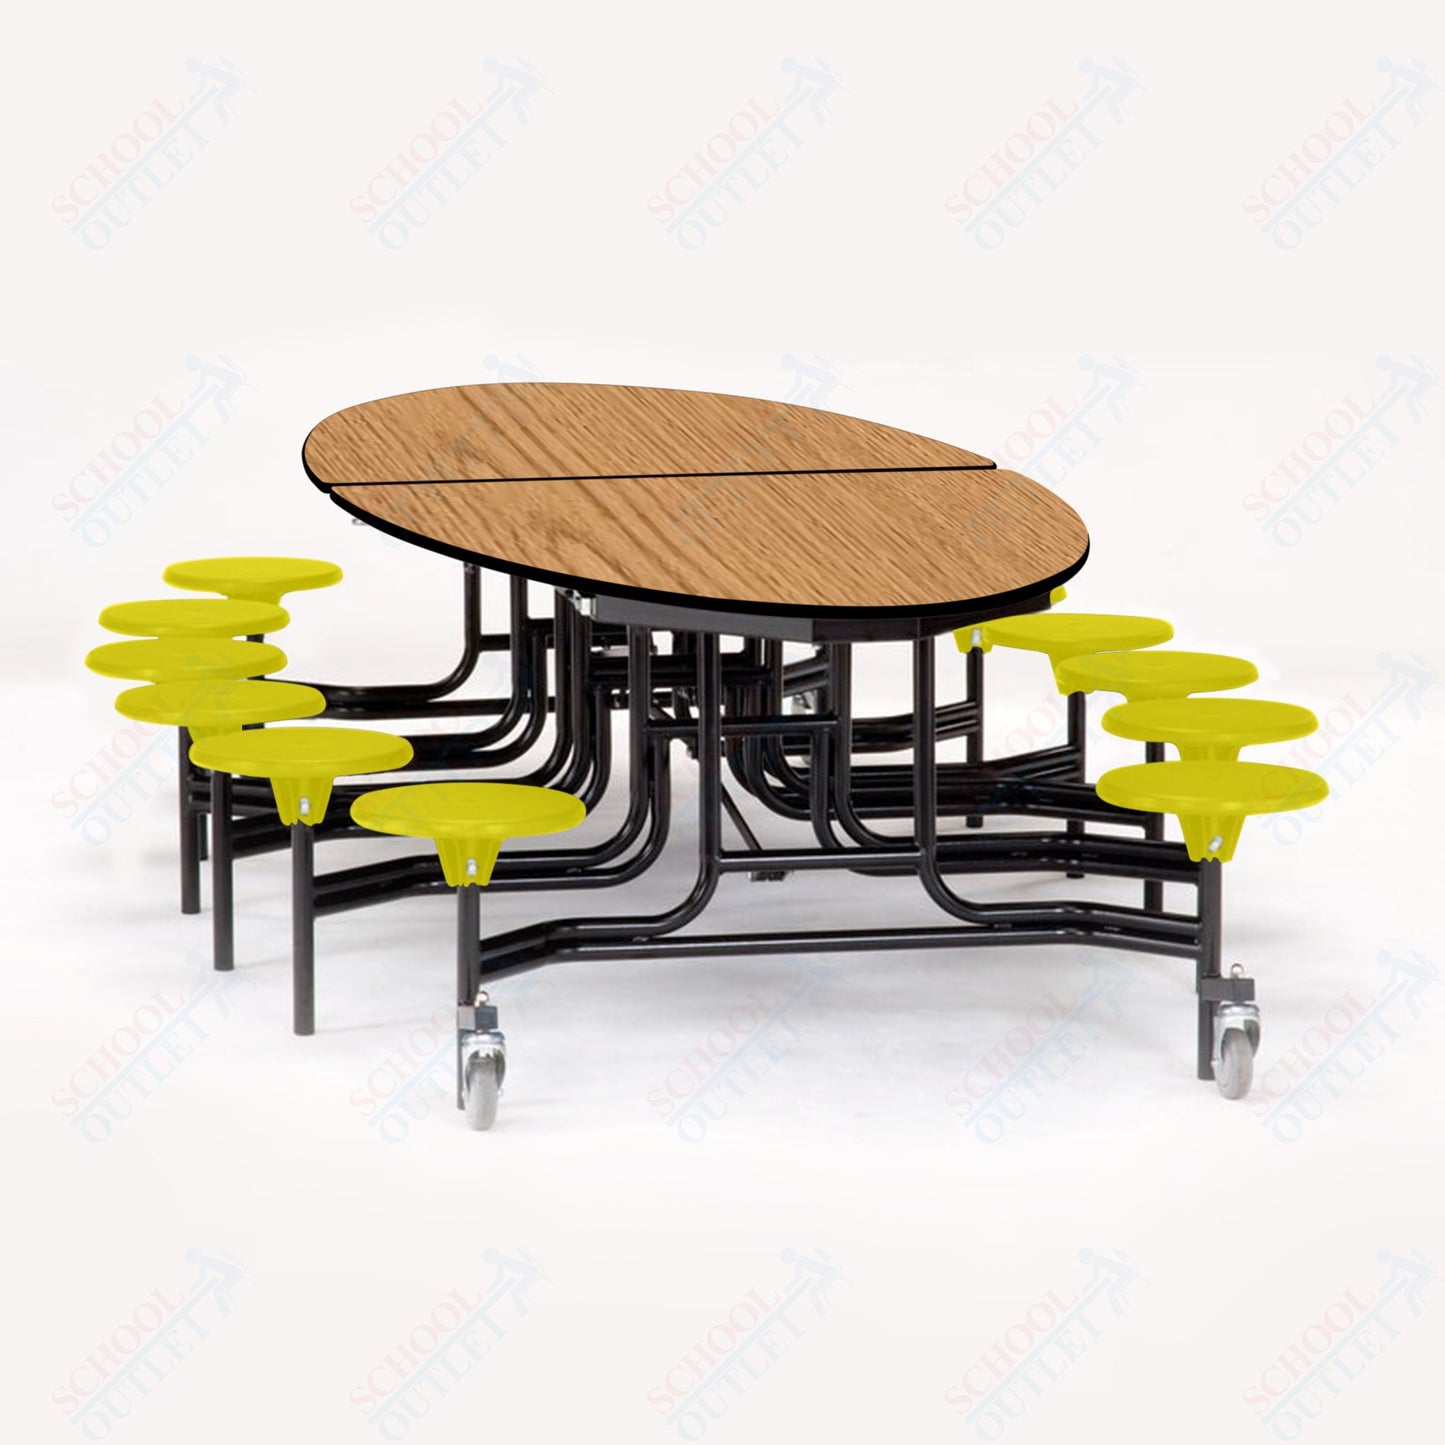 NPS 10' Elliptical Mobile Cafeteria Table - 12 Stools - Plywood Core - Protect Edge - Chrome Frame